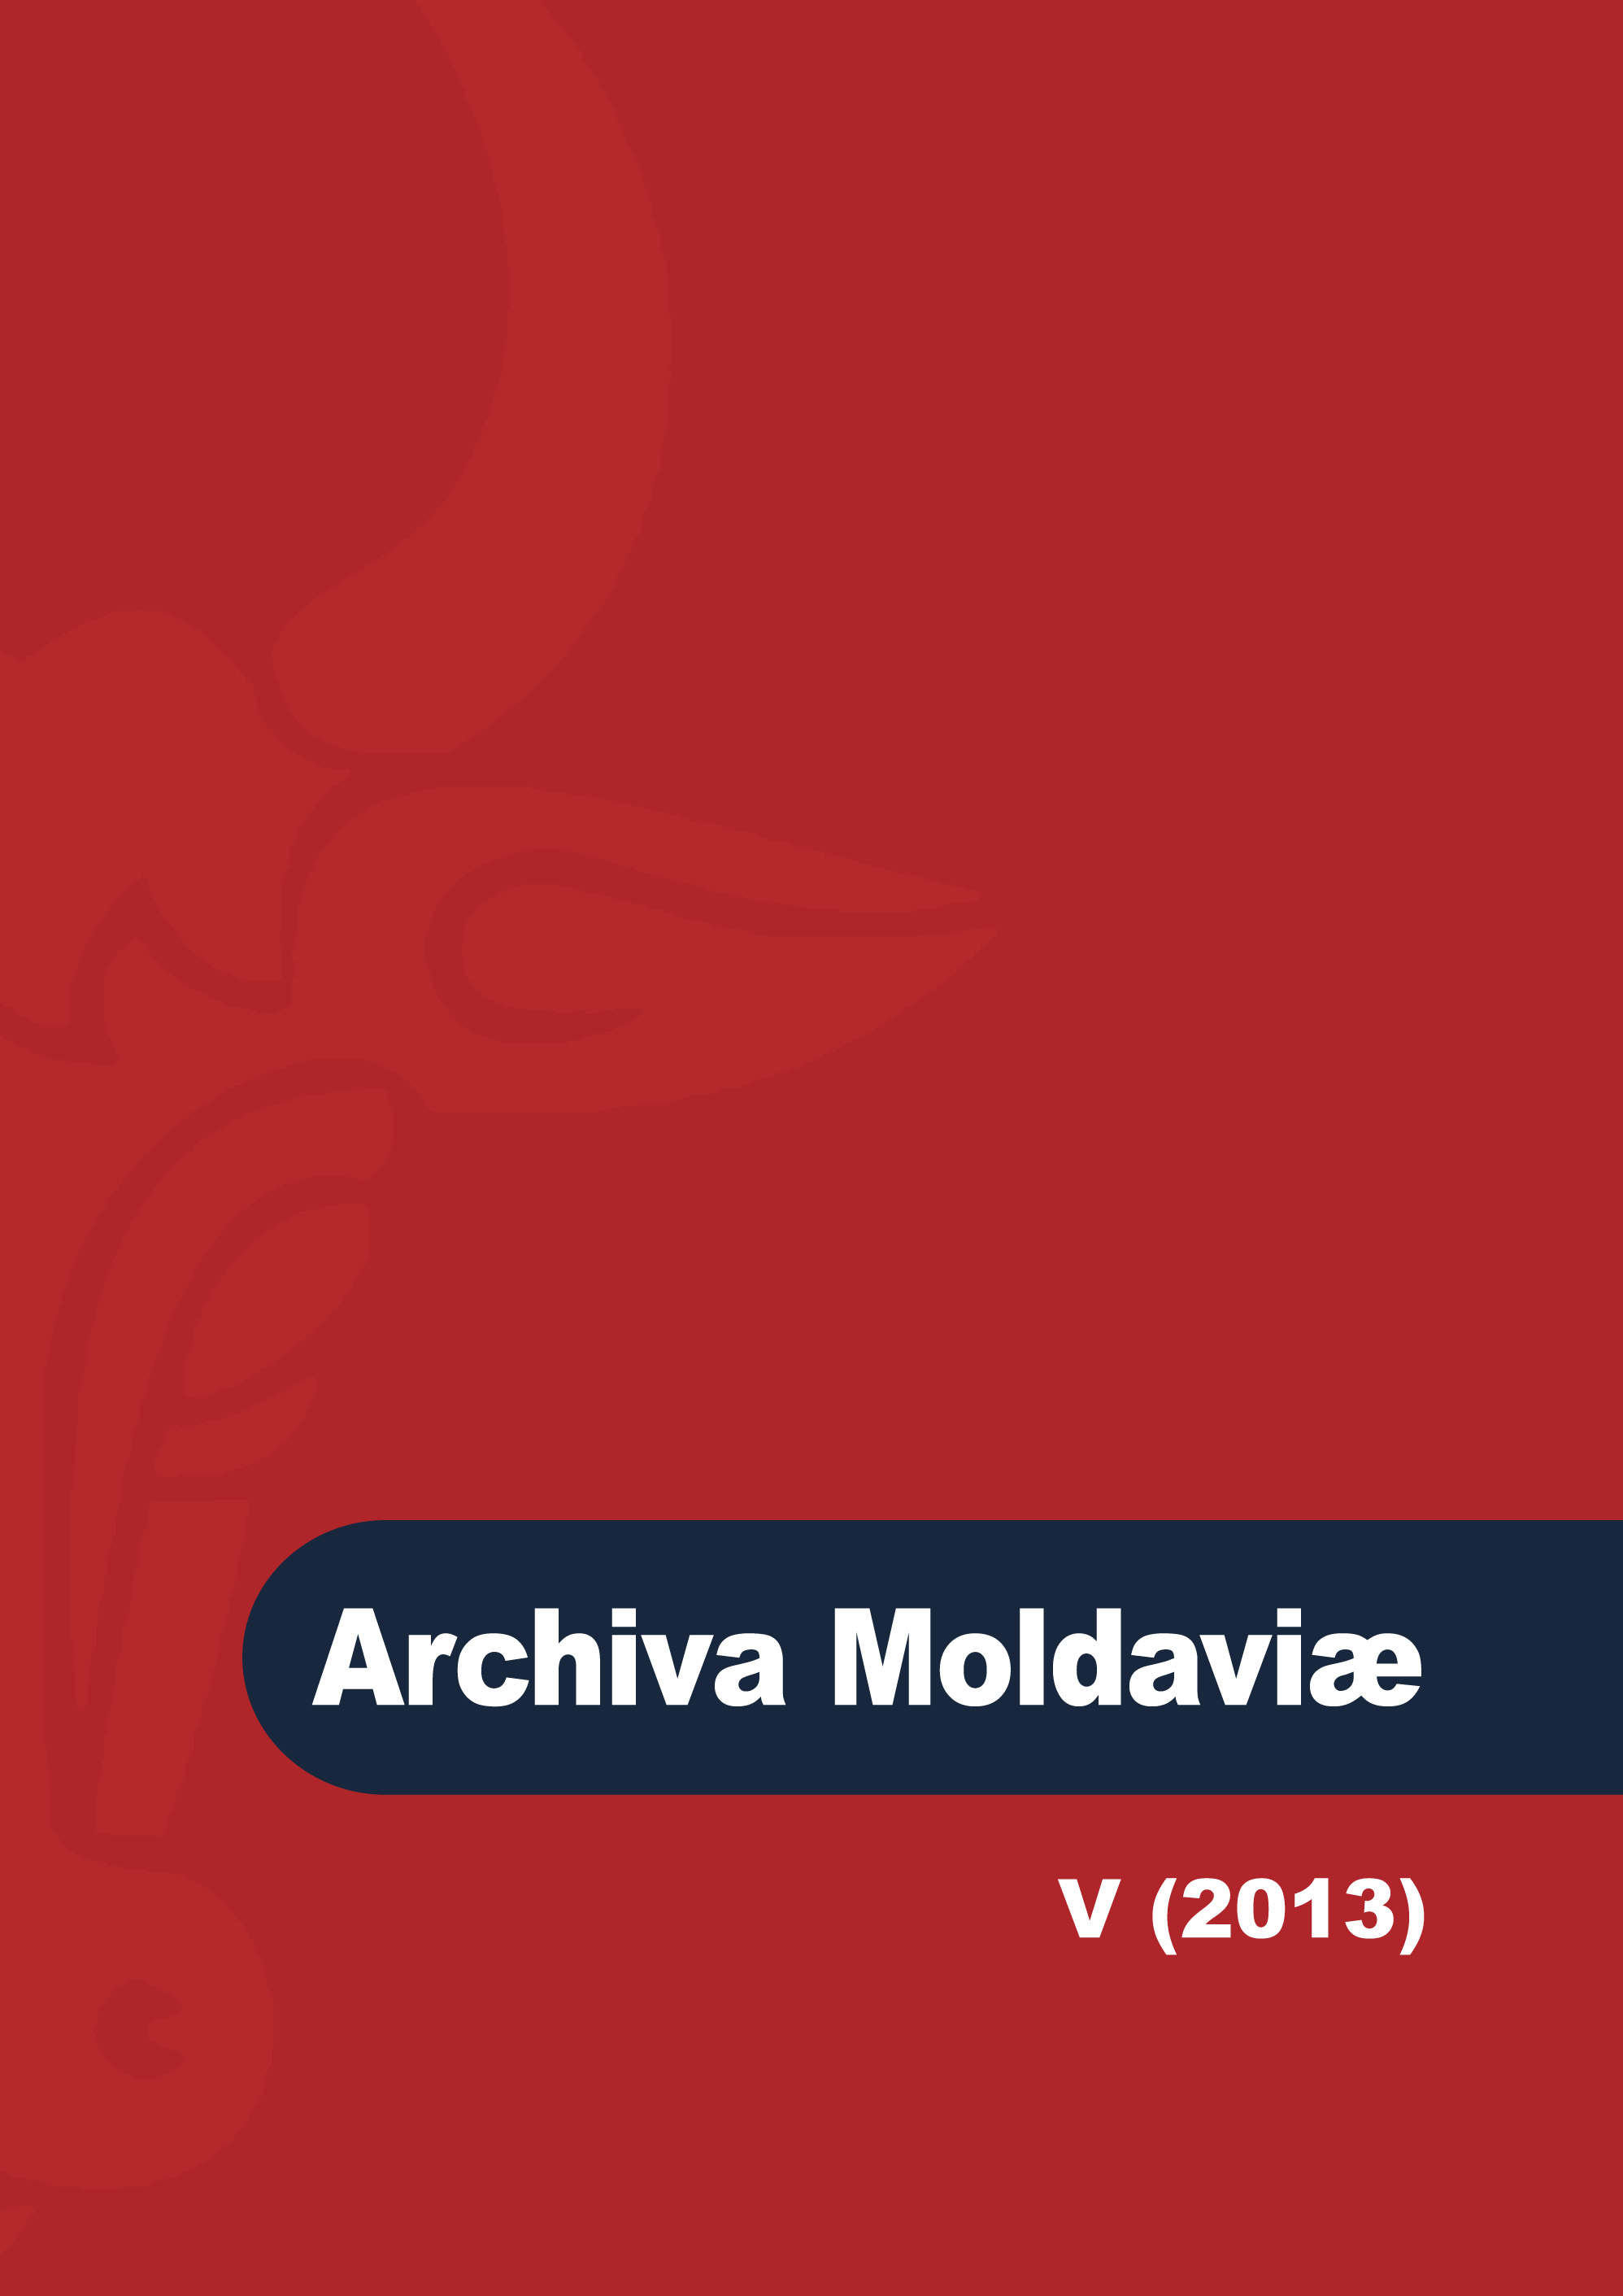 Archives, Historical Research and Local Memory. The Return of Moldavia’s Documents to Iaşi after 150 years Cover Image